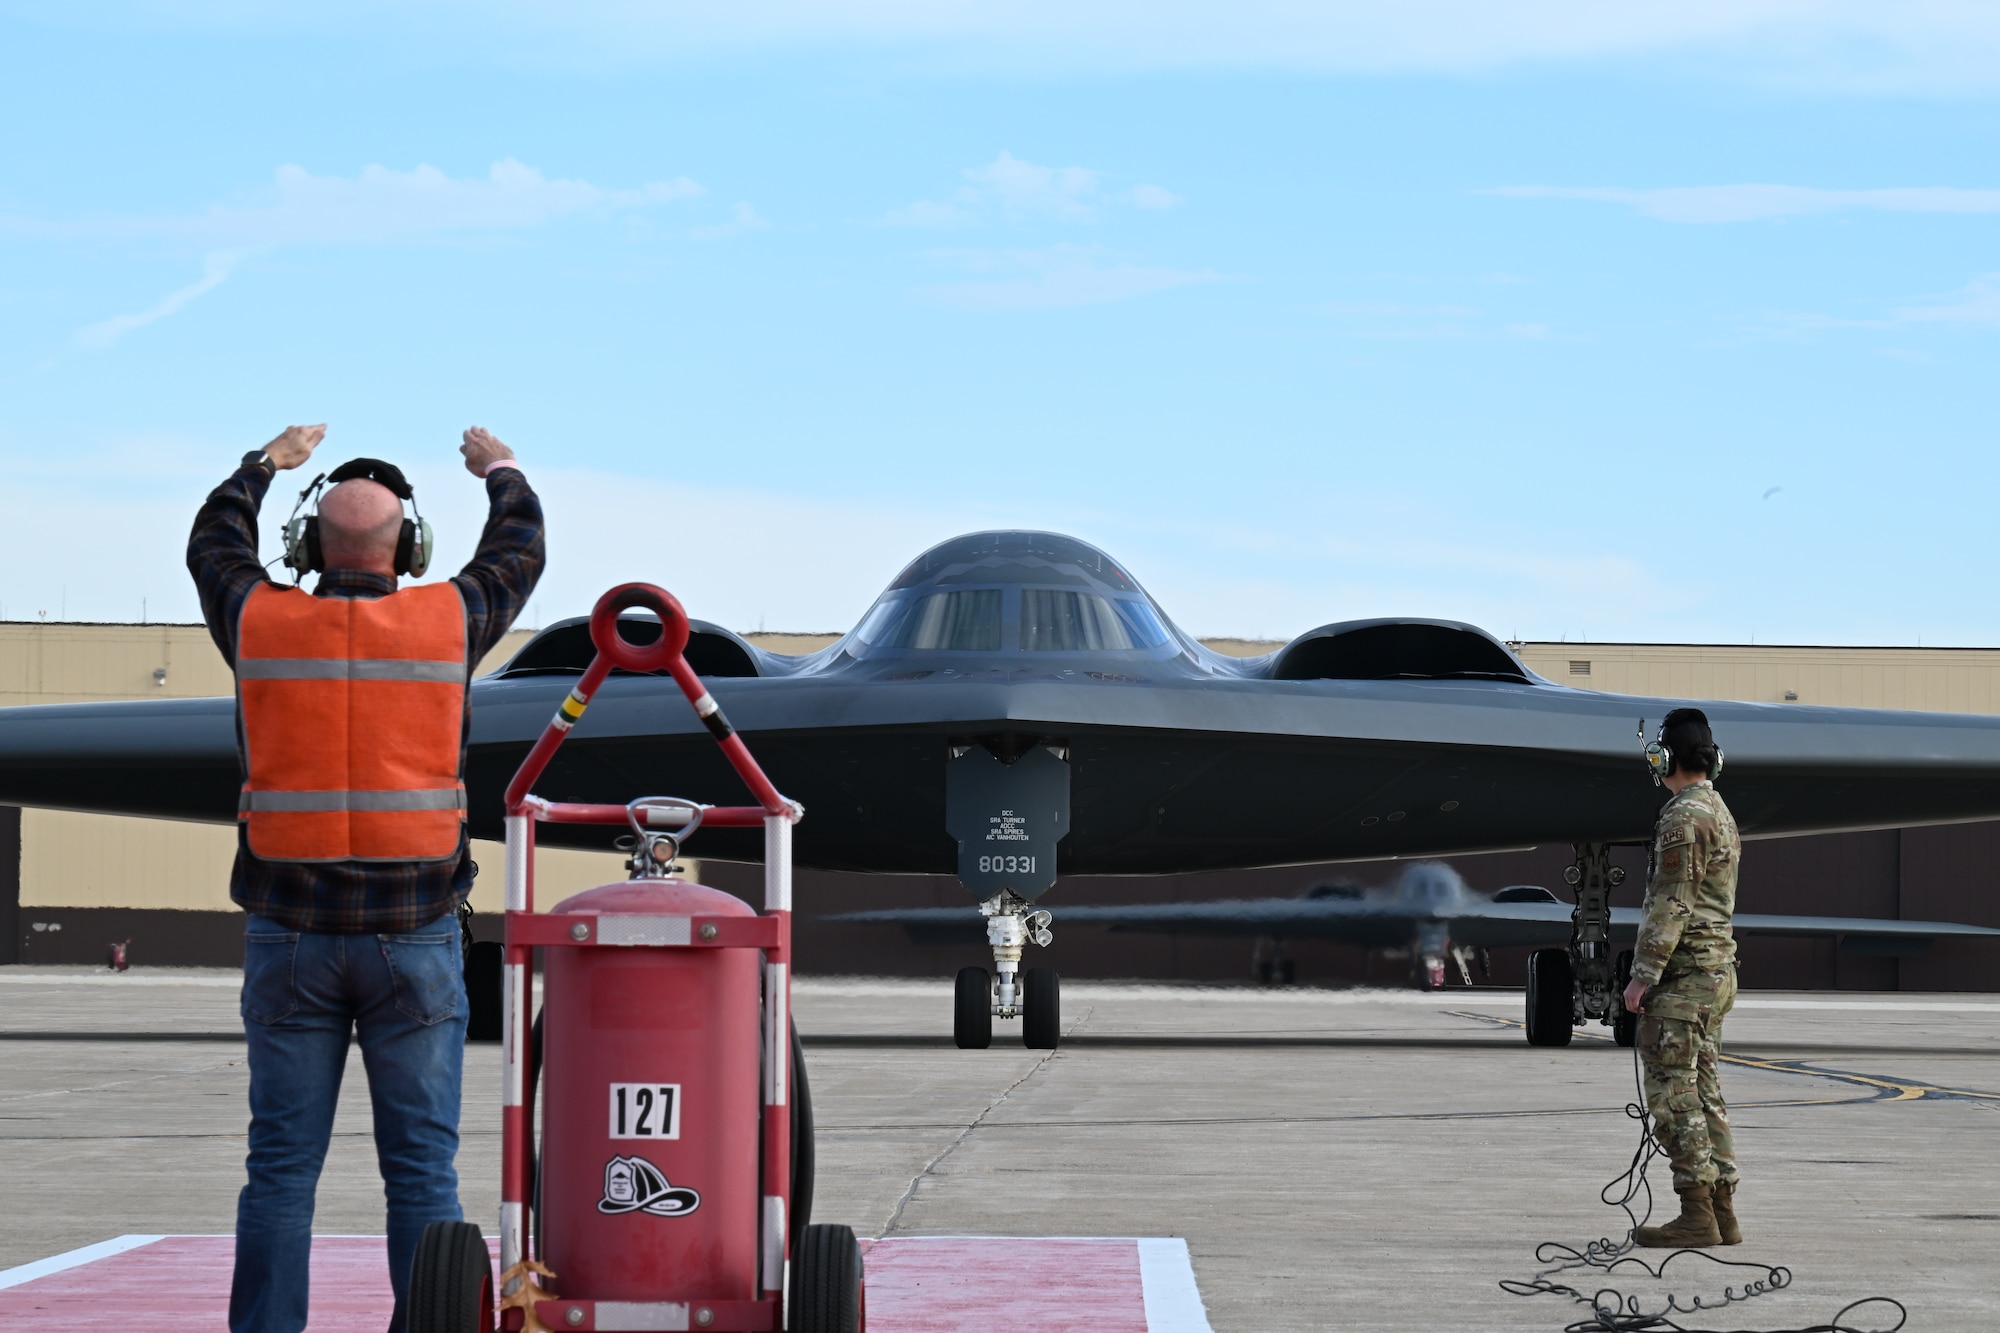 Retired U.S. Air Force Senior Master Sgt. Keith Meadows marshals the B-2 Spirit stealth bomber at Whiteman Air Force Base, Mo., Dec. 15, 2023. As a Staff Sgt. at the time, Keith was the first crew chief to marshal in the B-2 30 years ago when it first arrived at Whiteman AFB. (U.S. Air Force photo by Airman 1st Class Matthew S. Domingos)